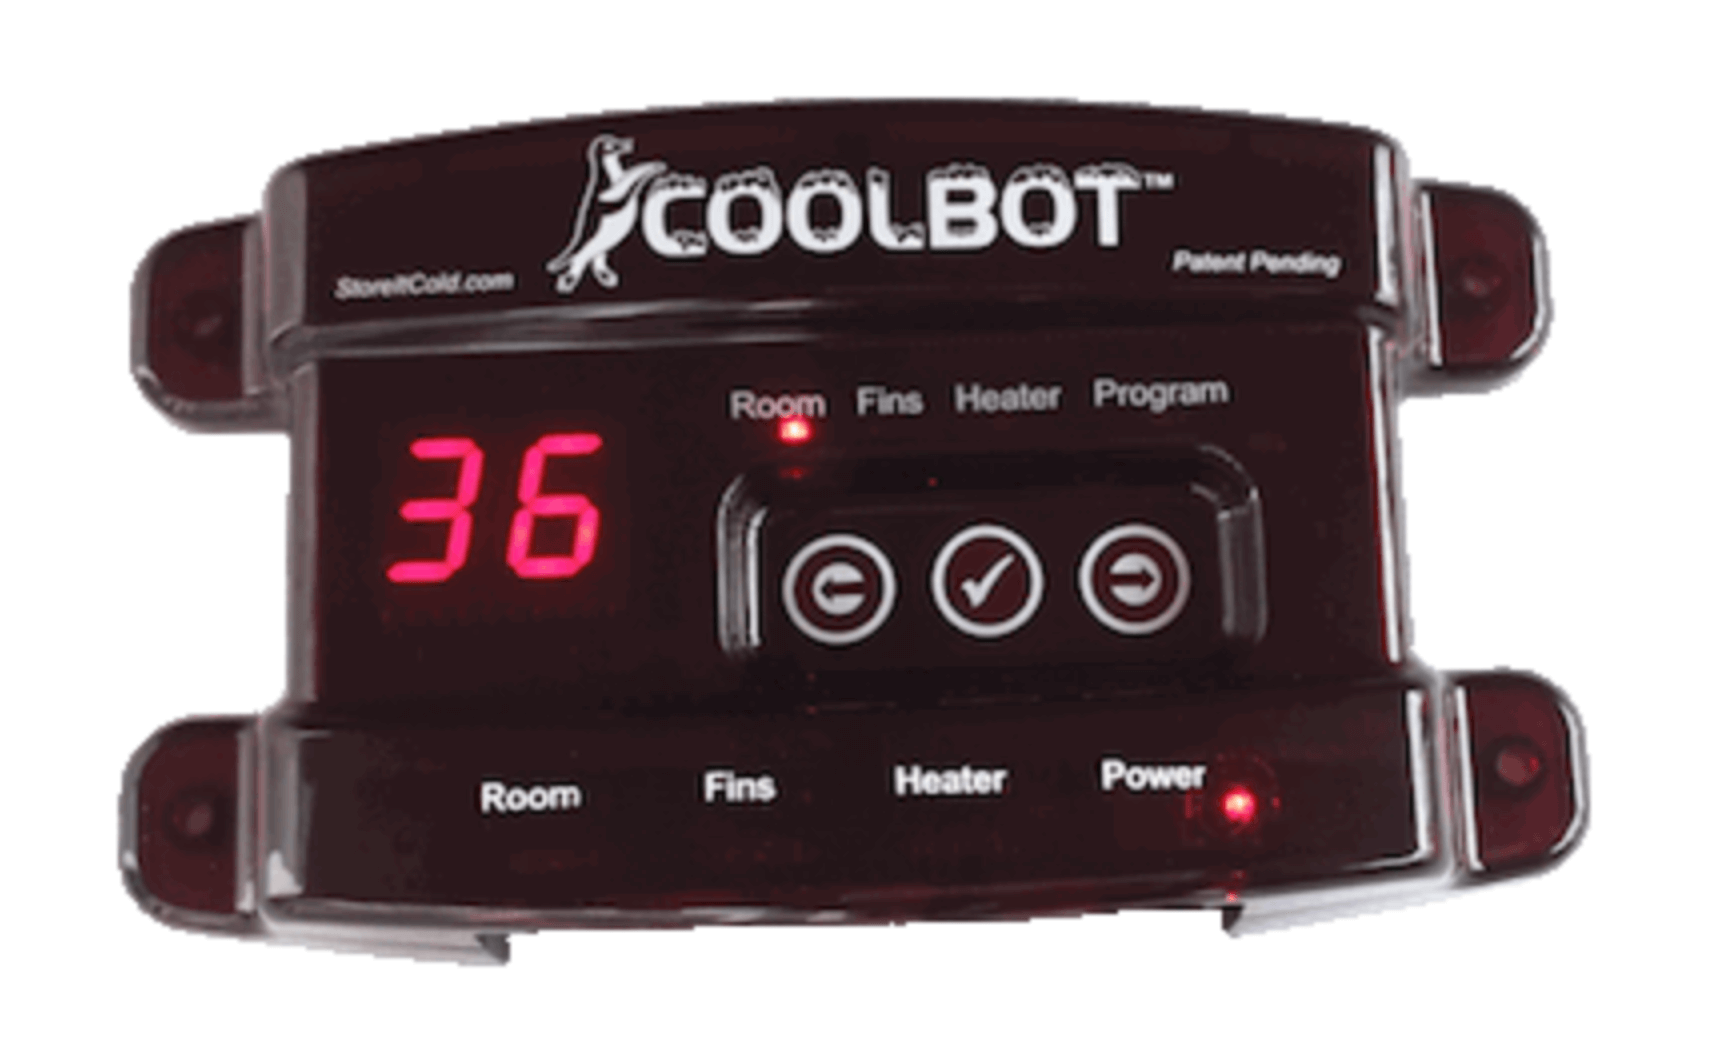 Coolbot device